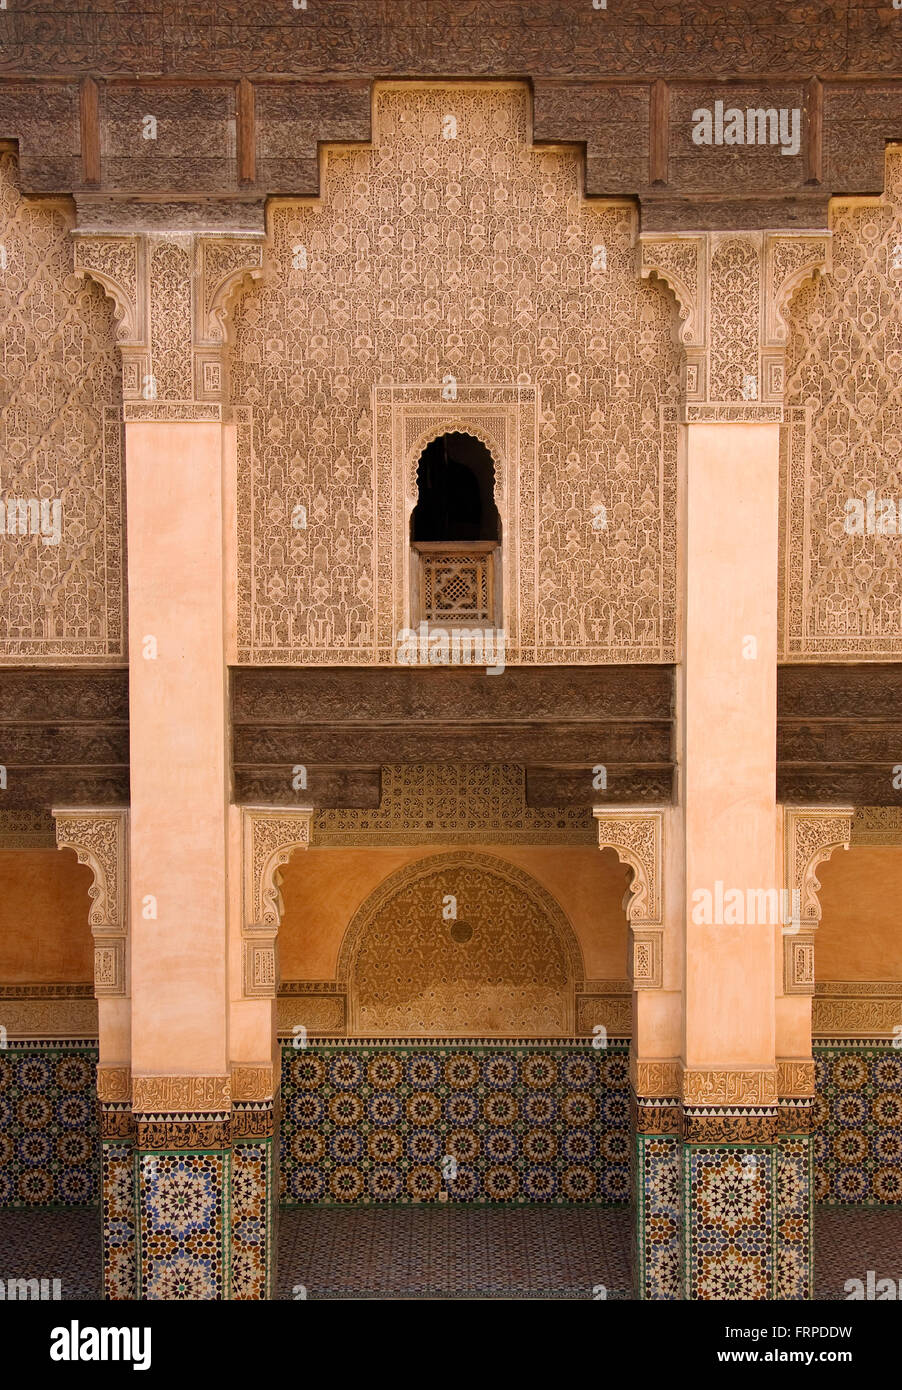 Columned arcades in the central courtyard of the Ben Youssef Medersa, Marrakesh, Morocco Stock Photo